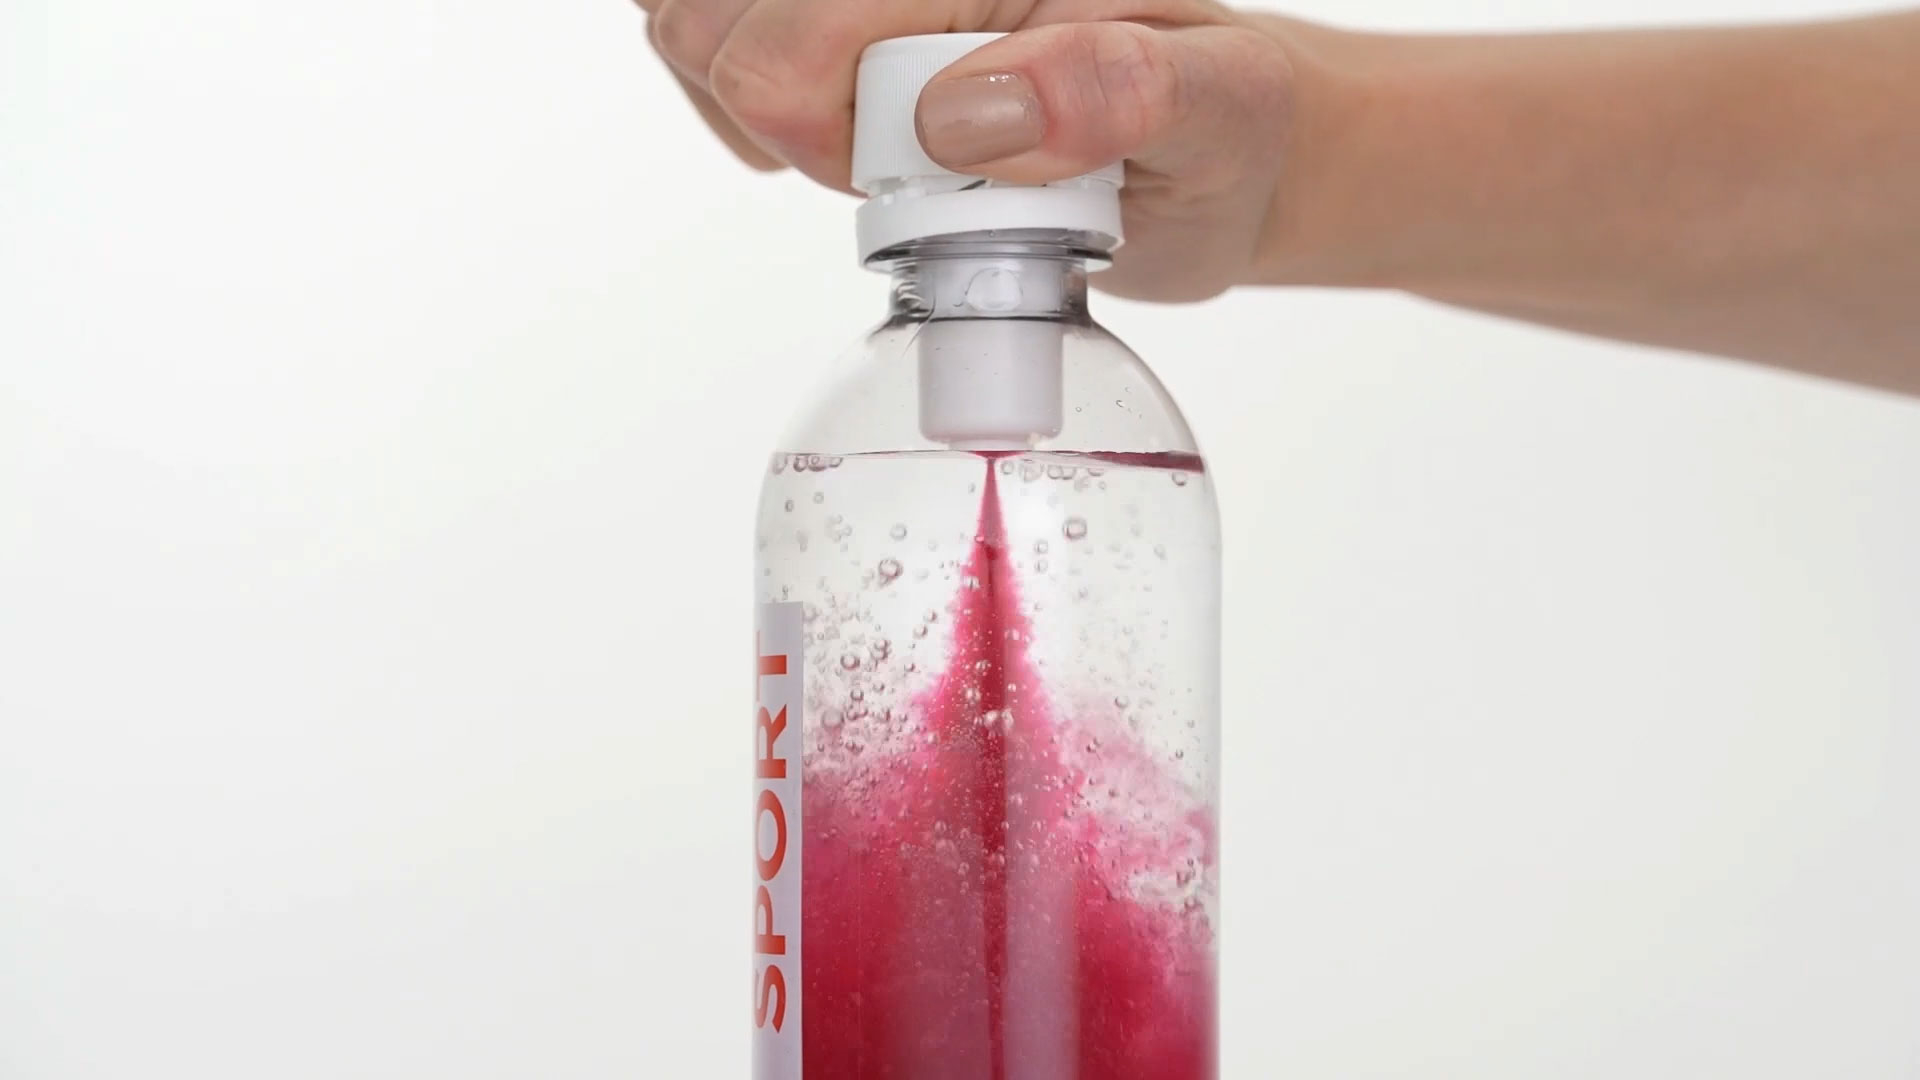 Just launches flavoured Just Infused bottled water in UK - Just Drinks